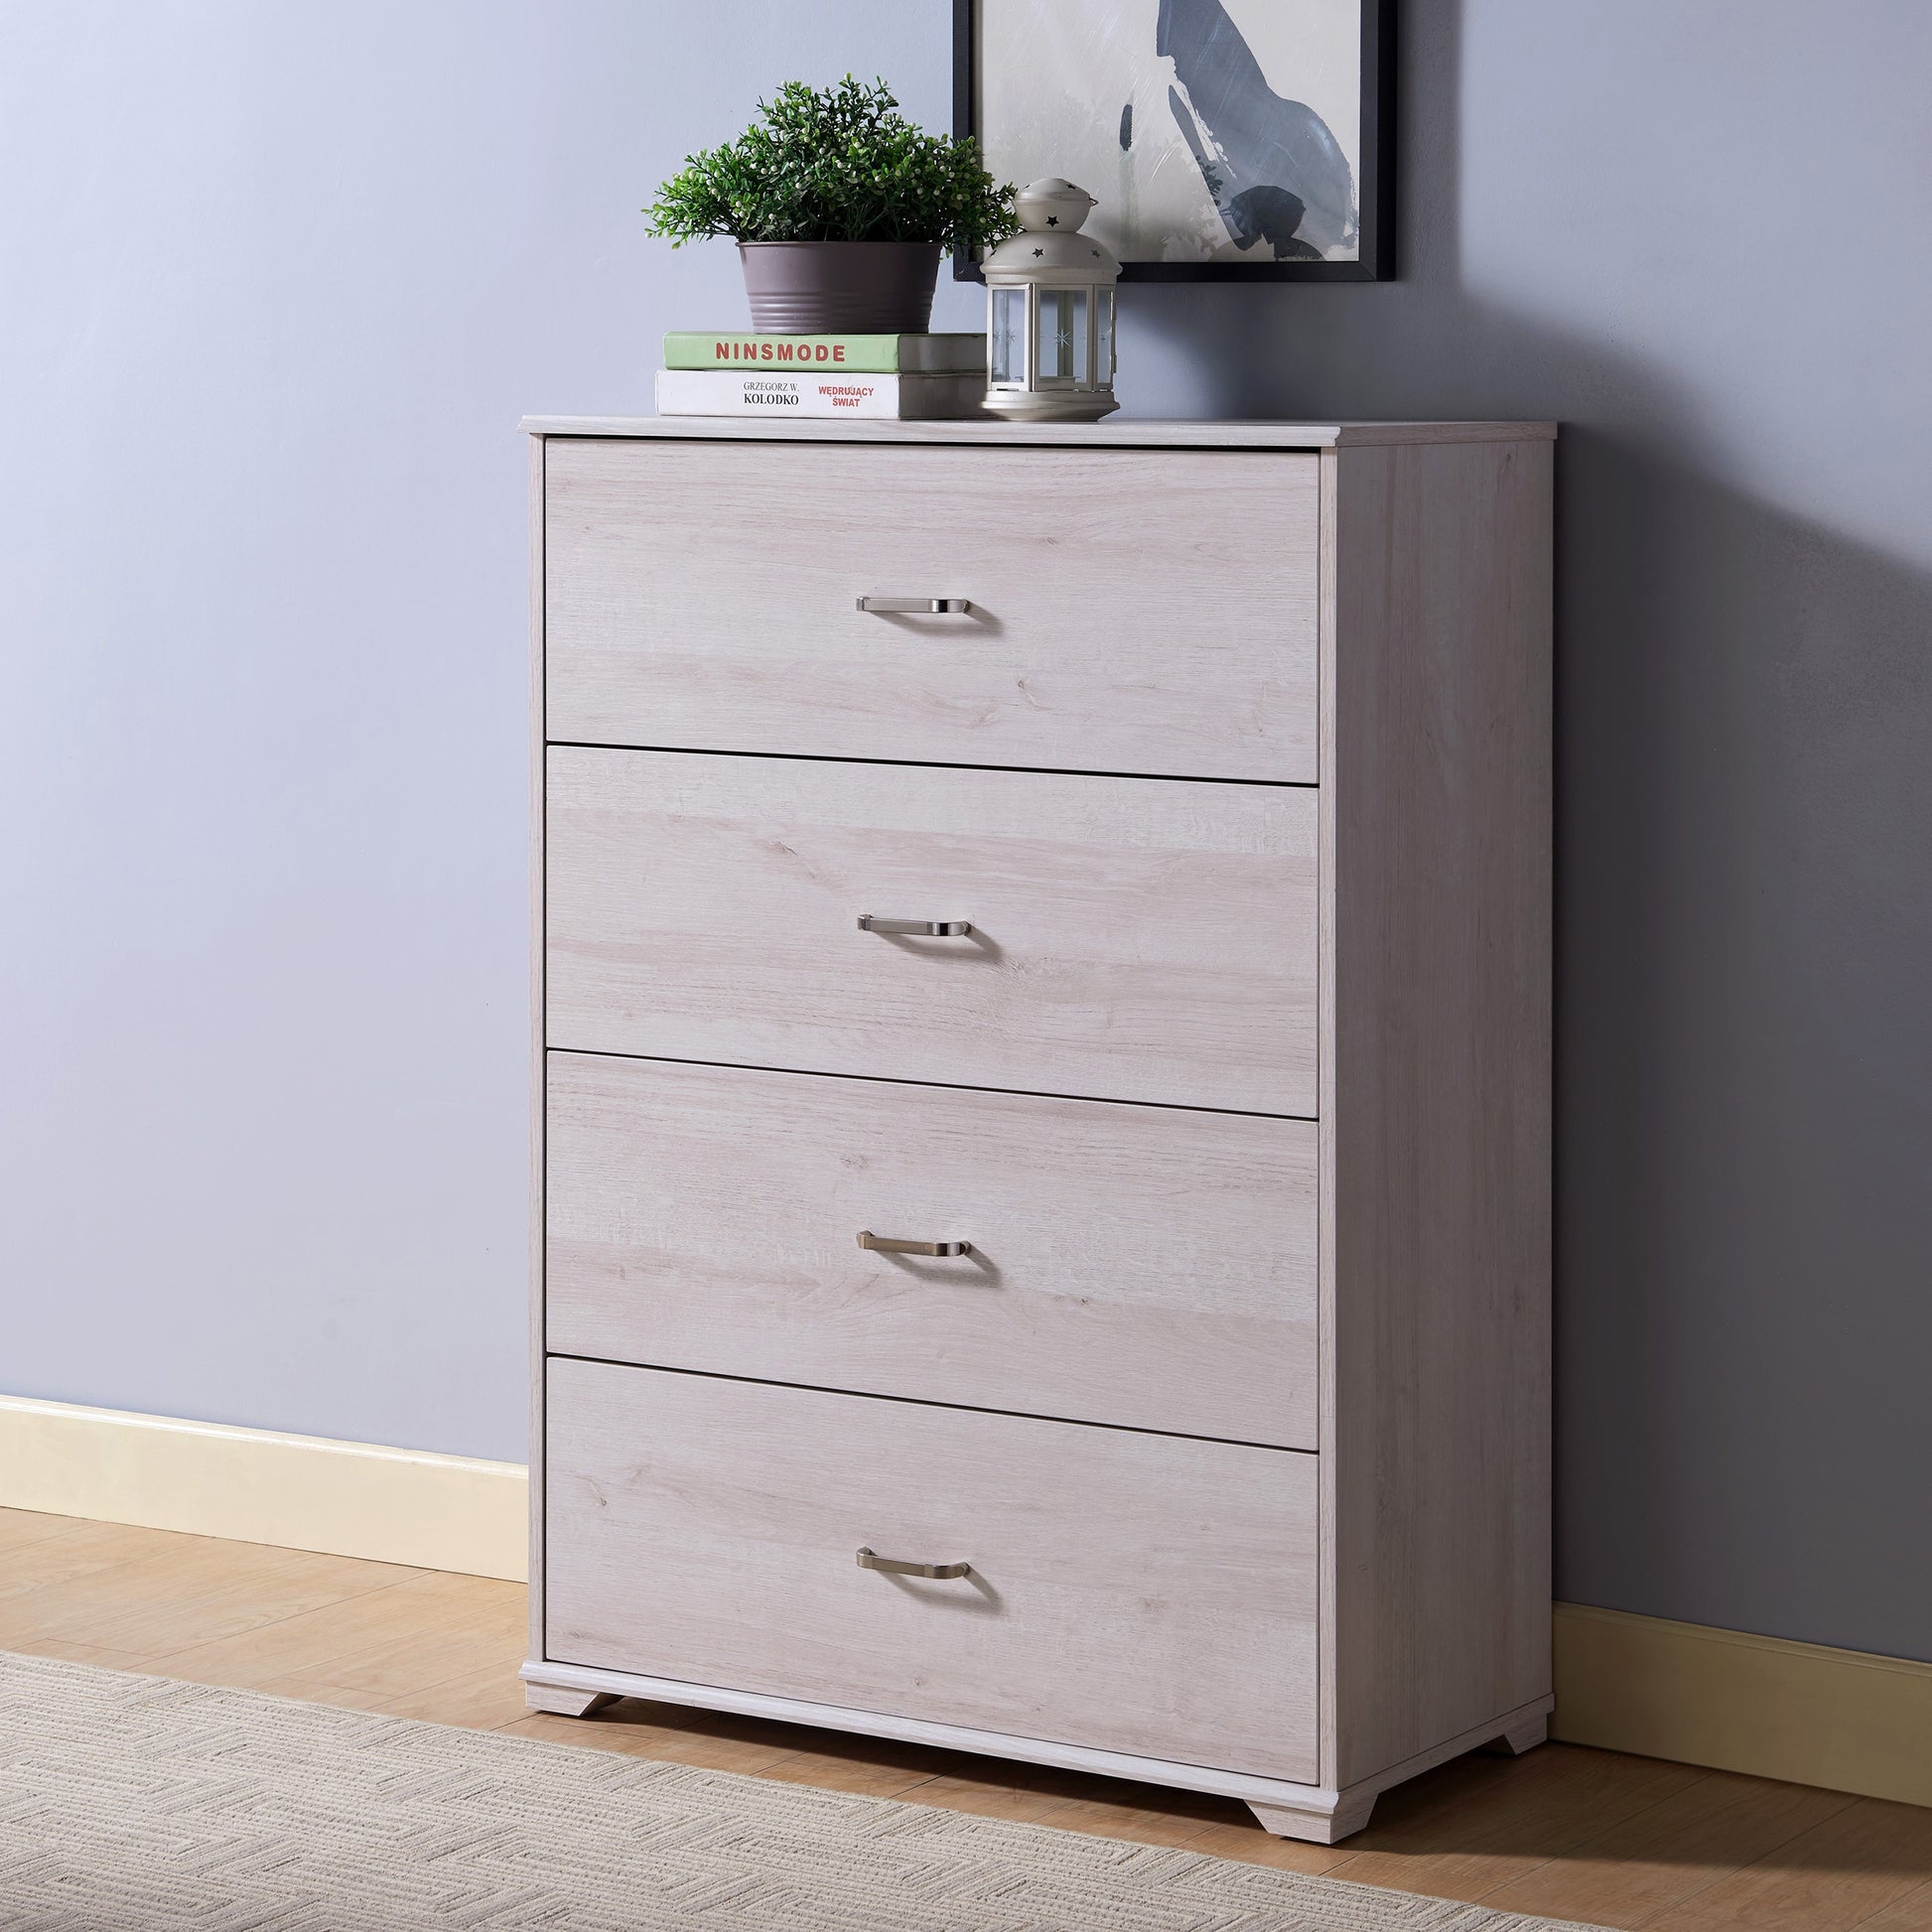 Left angled contemporary white oak four-drawer chest dresser with a rug and accessories